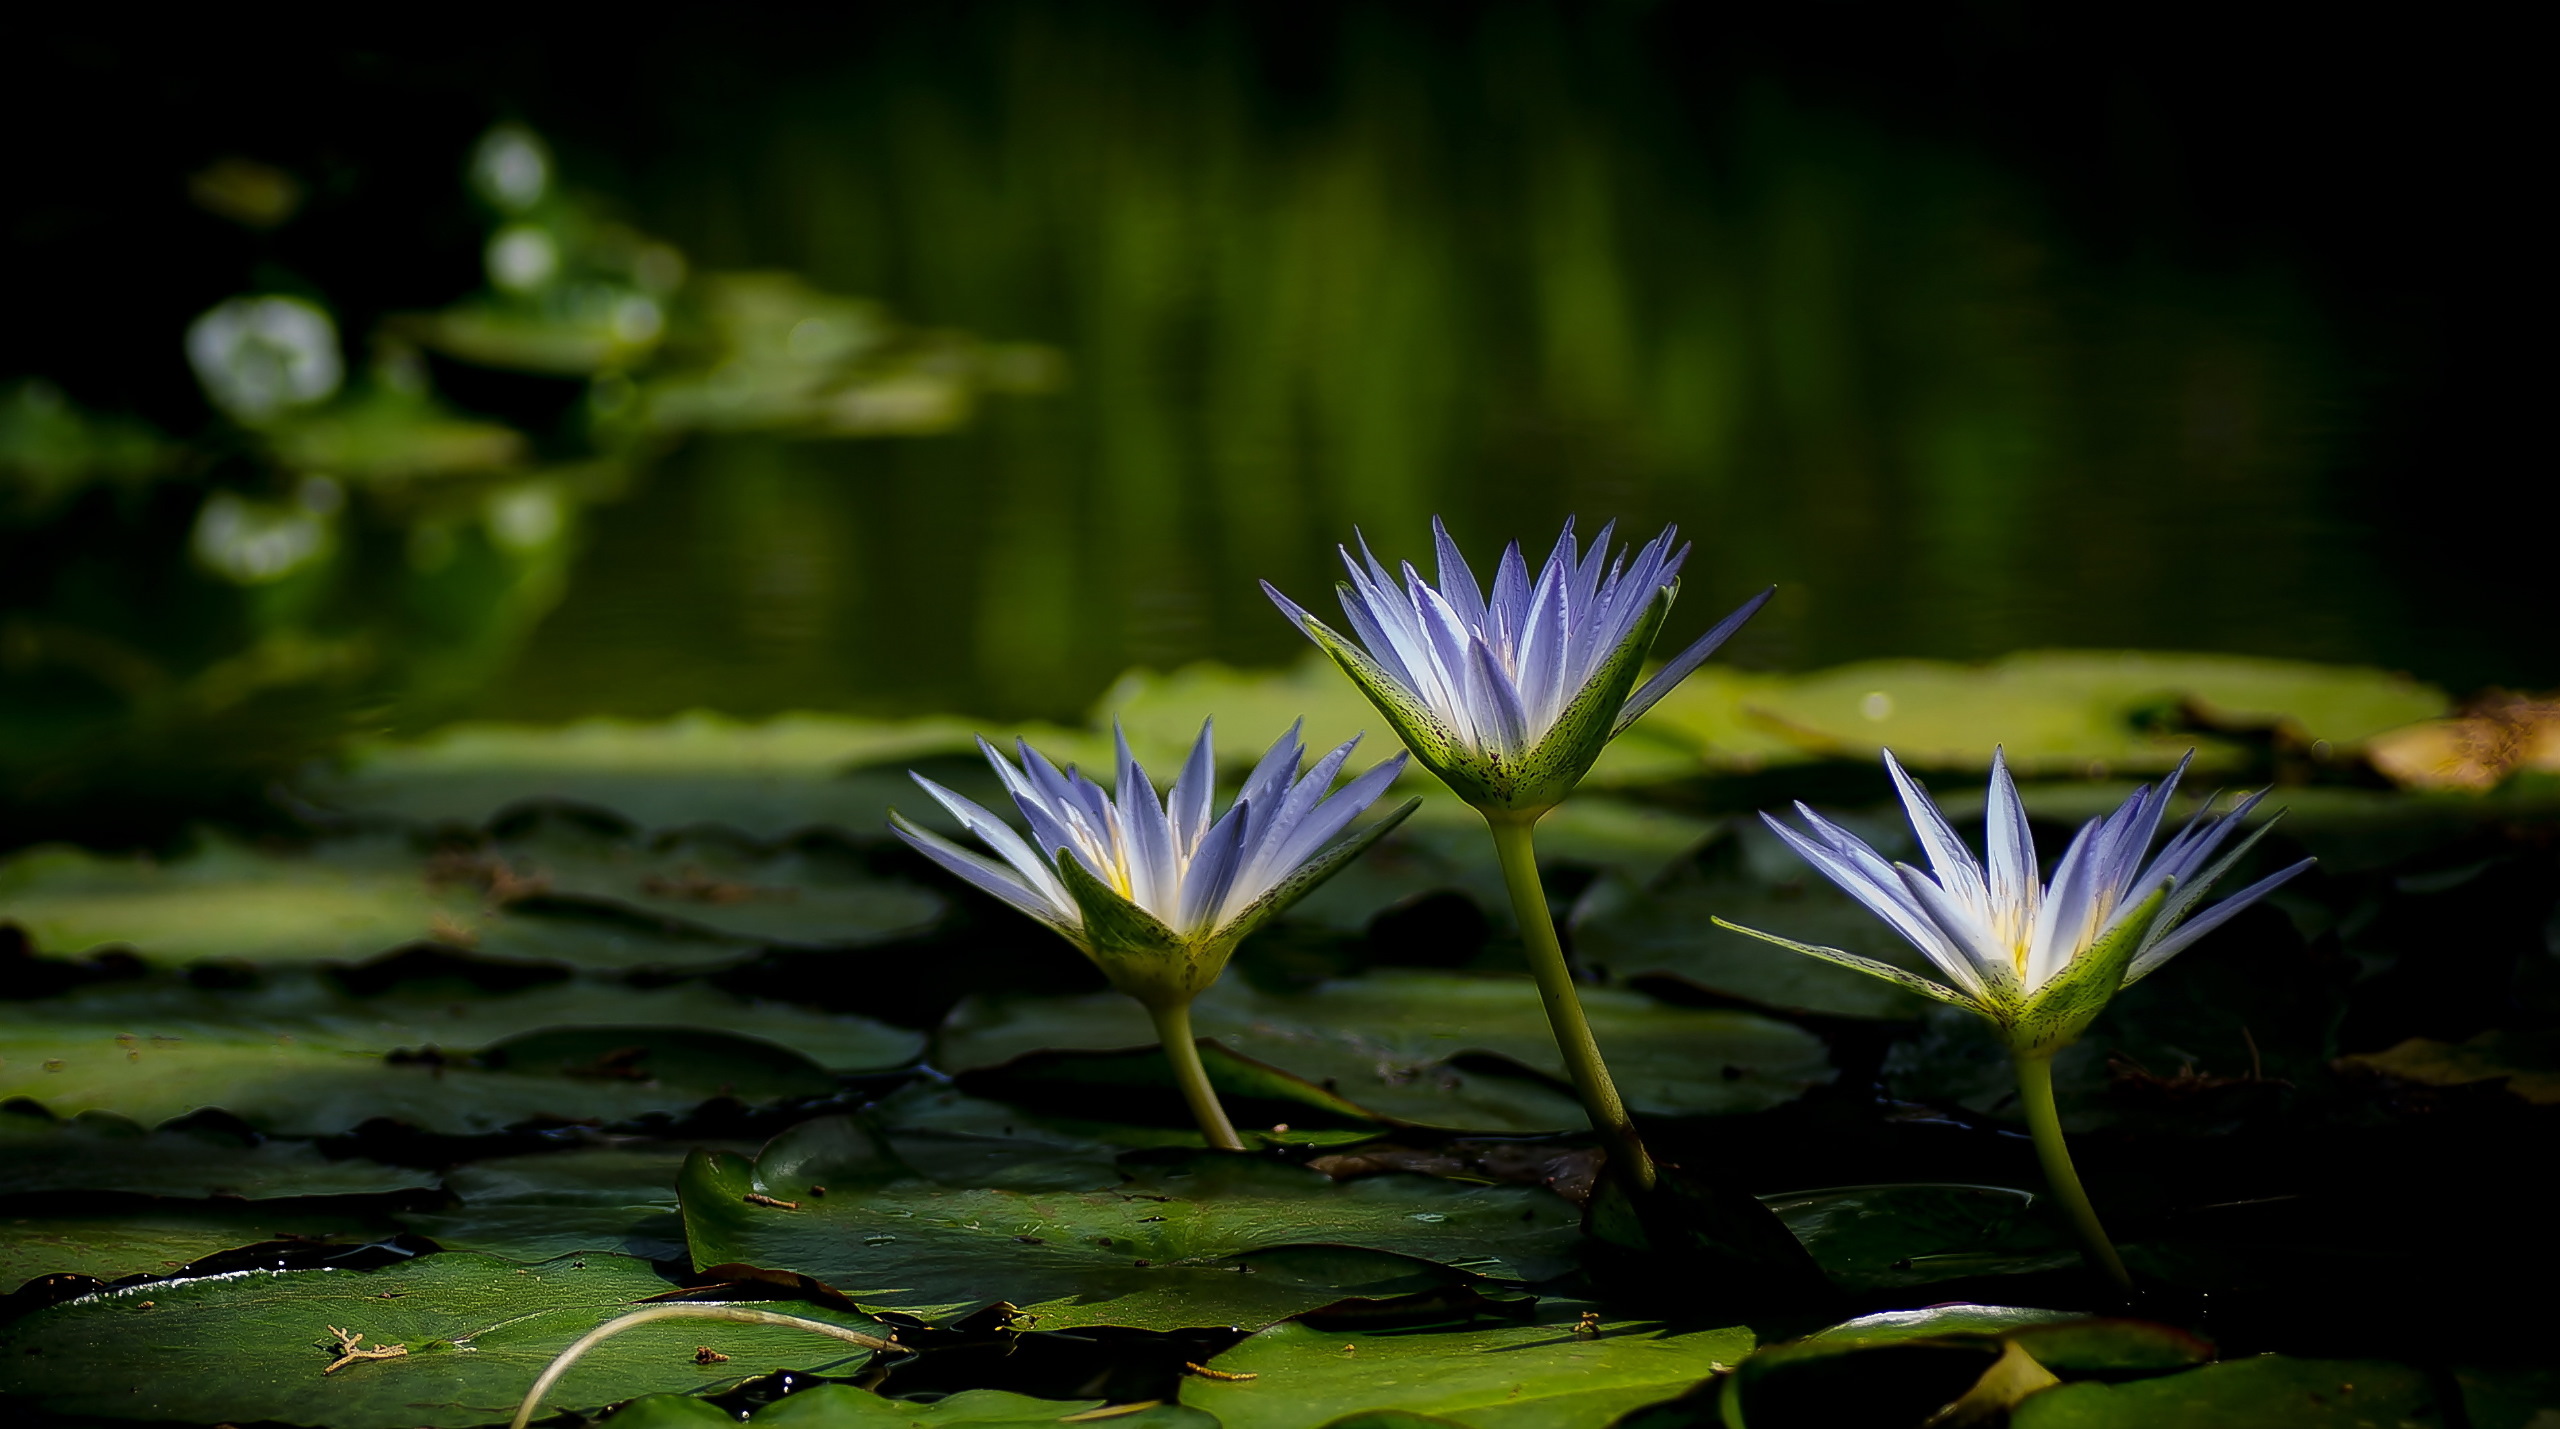 General 2560x1429 water lilies nature water flowers plants closeup